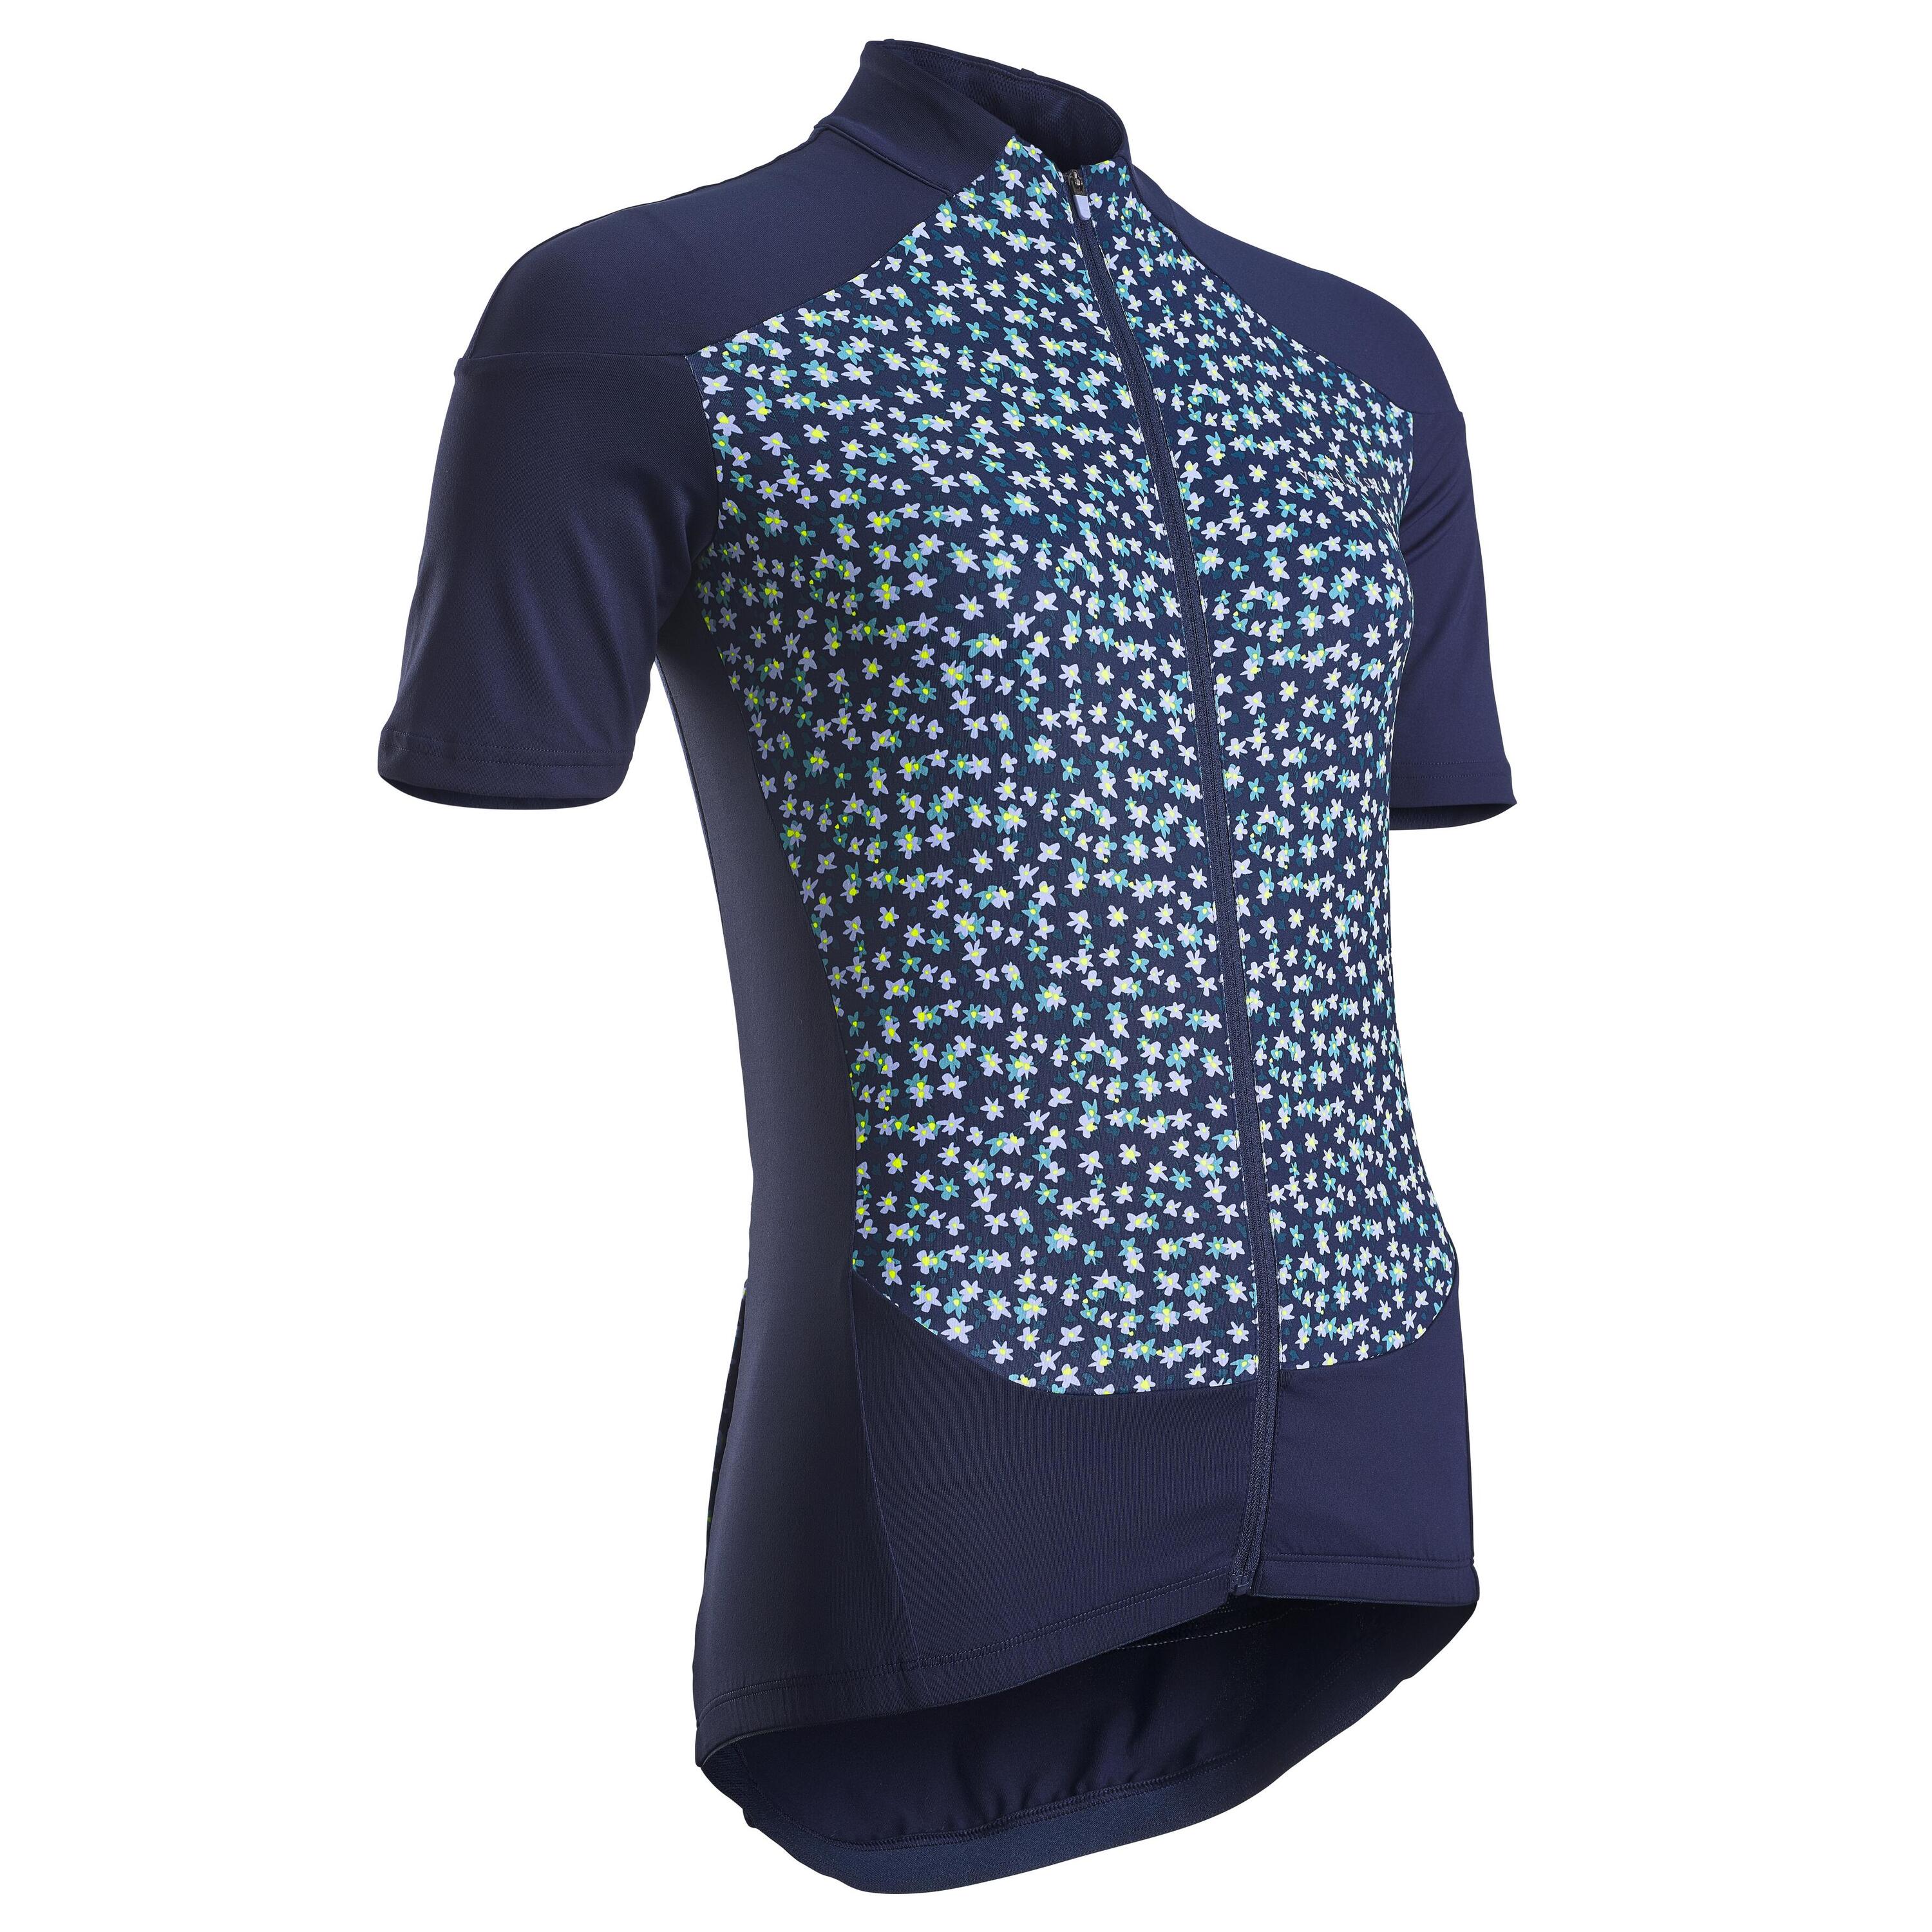 VAN RYSEL Women's Short-Sleeved Road Cycling Jersey RC500 - Floral/Navy